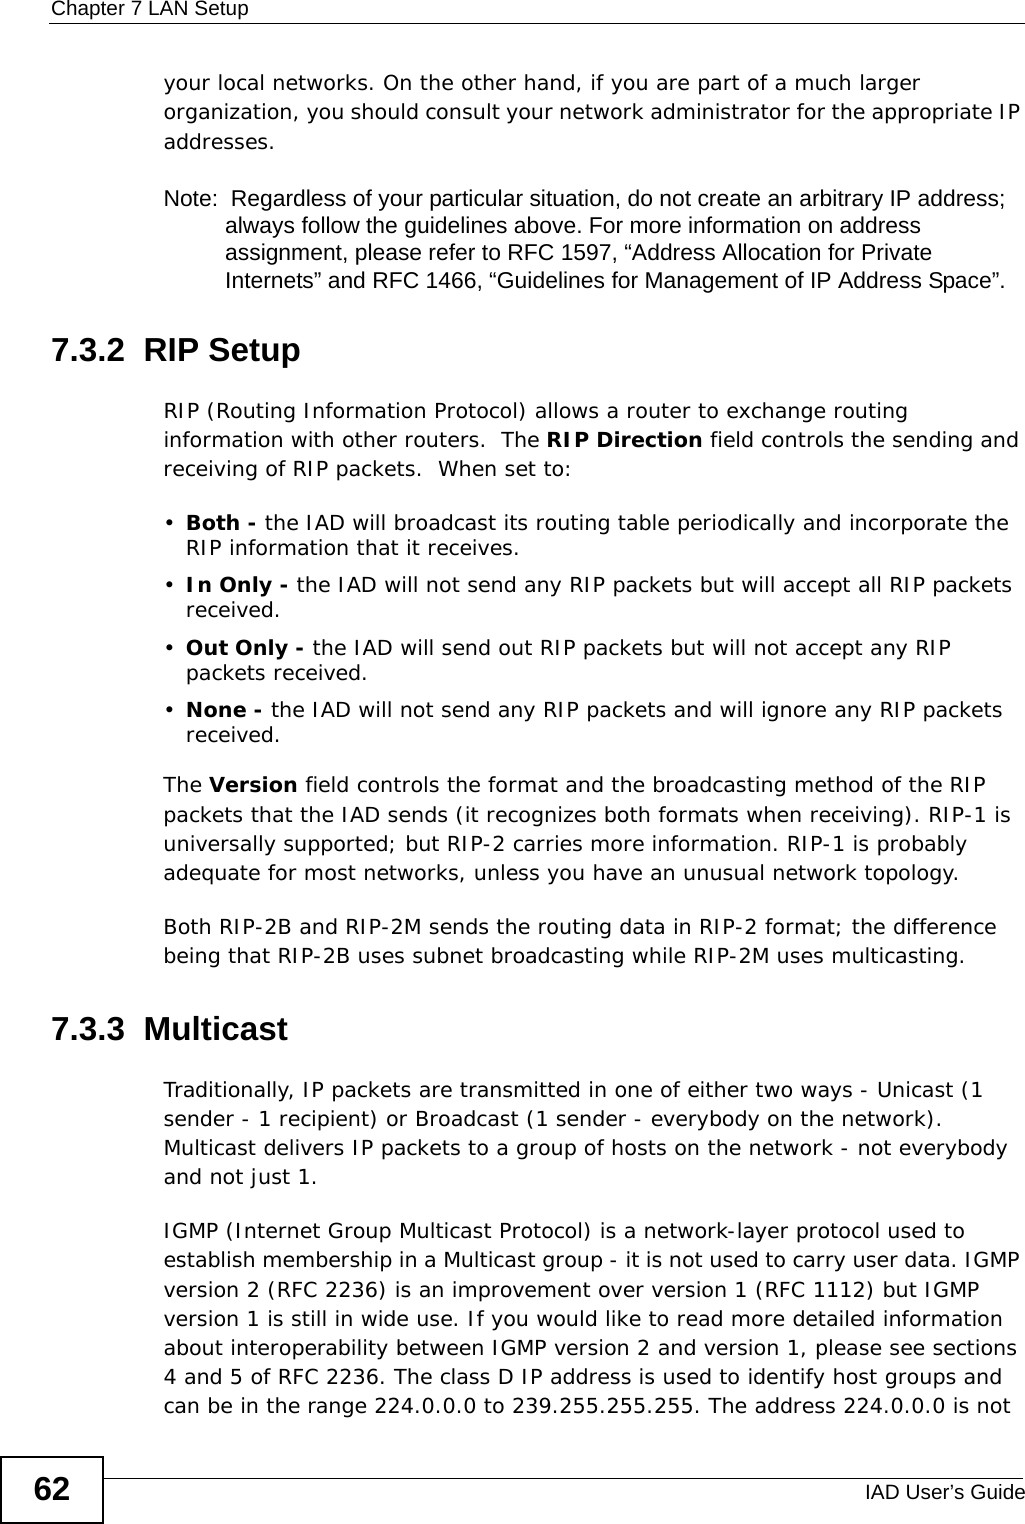 Chapter 7 LAN SetupIAD User’s Guide62your local networks. On the other hand, if you are part of a much larger organization, you should consult your network administrator for the appropriate IP addresses.Note:  Regardless of your particular situation, do not create an arbitrary IP address; always follow the guidelines above. For more information on address assignment, please refer to RFC 1597, “Address Allocation for Private Internets” and RFC 1466, “Guidelines for Management of IP Address Space”.7.3.2  RIP SetupRIP (Routing Information Protocol) allows a router to exchange routing information with other routers.  The RIP Direction field controls the sending and receiving of RIP packets.  When set to:•Both - the IAD will broadcast its routing table periodically and incorporate the RIP information that it receives.•In Only - the IAD will not send any RIP packets but will accept all RIP packets received.•Out Only - the IAD will send out RIP packets but will not accept any RIP packets received.•None - the IAD will not send any RIP packets and will ignore any RIP packets received.The Version field controls the format and the broadcasting method of the RIP packets that the IAD sends (it recognizes both formats when receiving). RIP-1 is universally supported; but RIP-2 carries more information. RIP-1 is probably adequate for most networks, unless you have an unusual network topology.Both RIP-2B and RIP-2M sends the routing data in RIP-2 format; the difference being that RIP-2B uses subnet broadcasting while RIP-2M uses multicasting.7.3.3  MulticastTraditionally, IP packets are transmitted in one of either two ways - Unicast (1 sender - 1 recipient) or Broadcast (1 sender - everybody on the network). Multicast delivers IP packets to a group of hosts on the network - not everybody and not just 1. IGMP (Internet Group Multicast Protocol) is a network-layer protocol used to establish membership in a Multicast group - it is not used to carry user data. IGMP version 2 (RFC 2236) is an improvement over version 1 (RFC 1112) but IGMP version 1 is still in wide use. If you would like to read more detailed information about interoperability between IGMP version 2 and version 1, please see sections 4 and 5 of RFC 2236. The class D IP address is used to identify host groups and can be in the range 224.0.0.0 to 239.255.255.255. The address 224.0.0.0 is not 